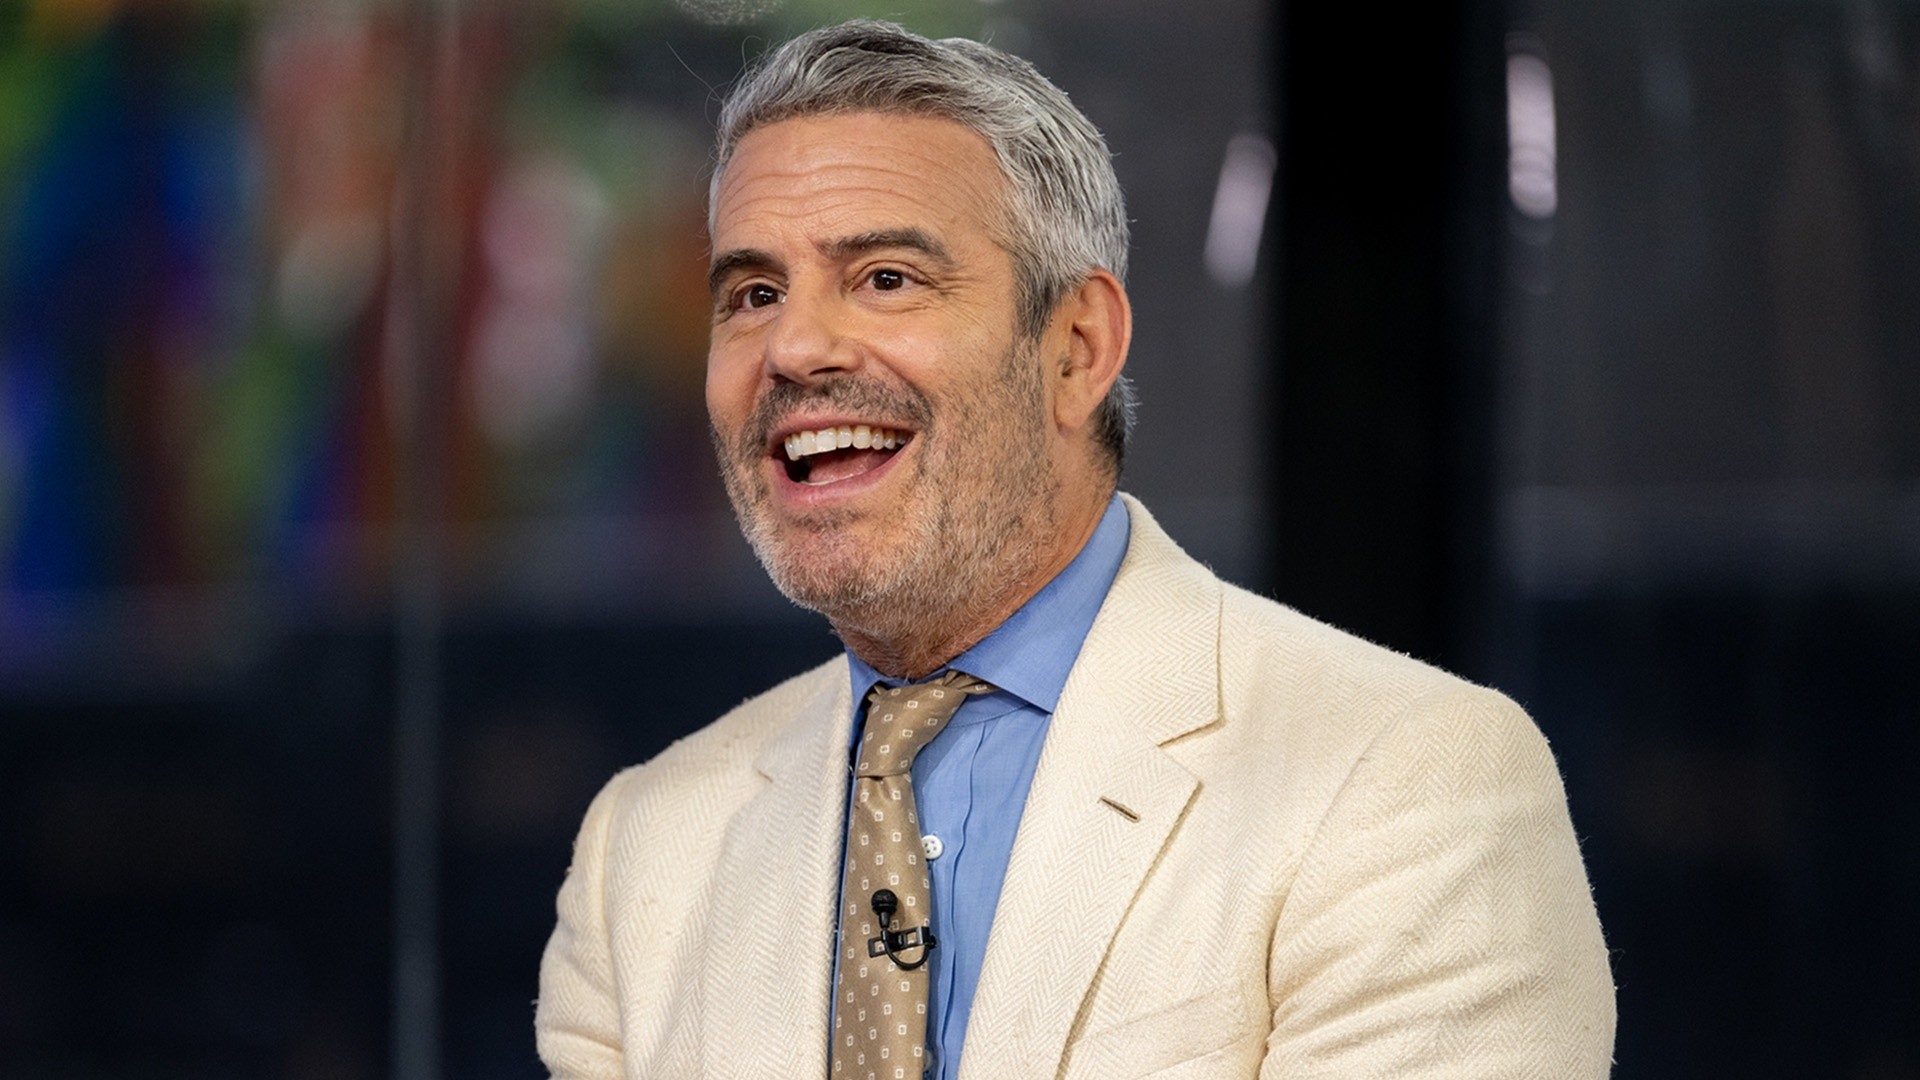 Andy Cohen talks fulfilling his dream of being himself on television